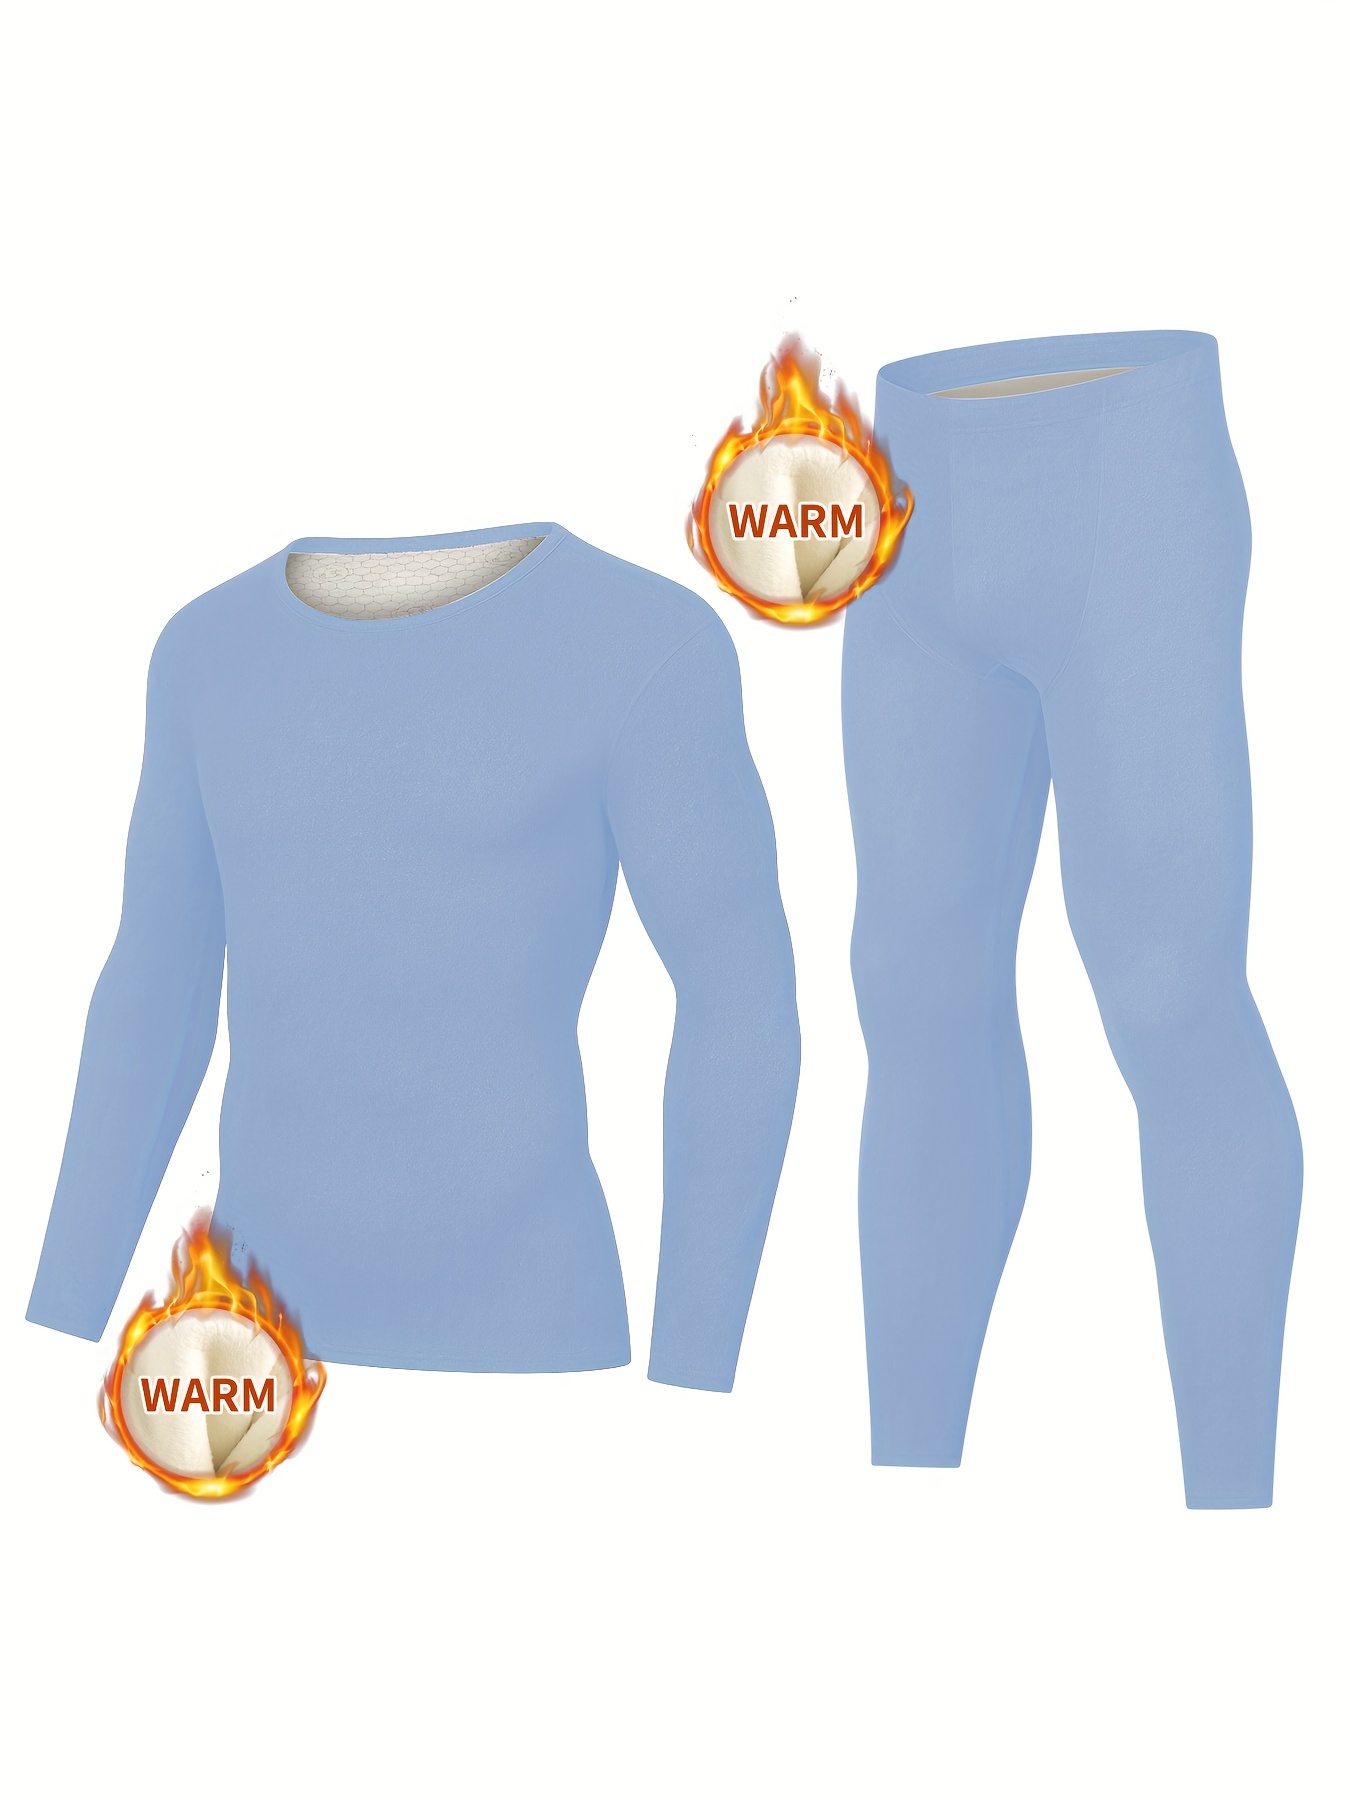 Thermal Underwear Set, Thermal Suit Long Sleeve Top and Bottom Long Johns  Winter Warm Base Layer-Man G||2XL